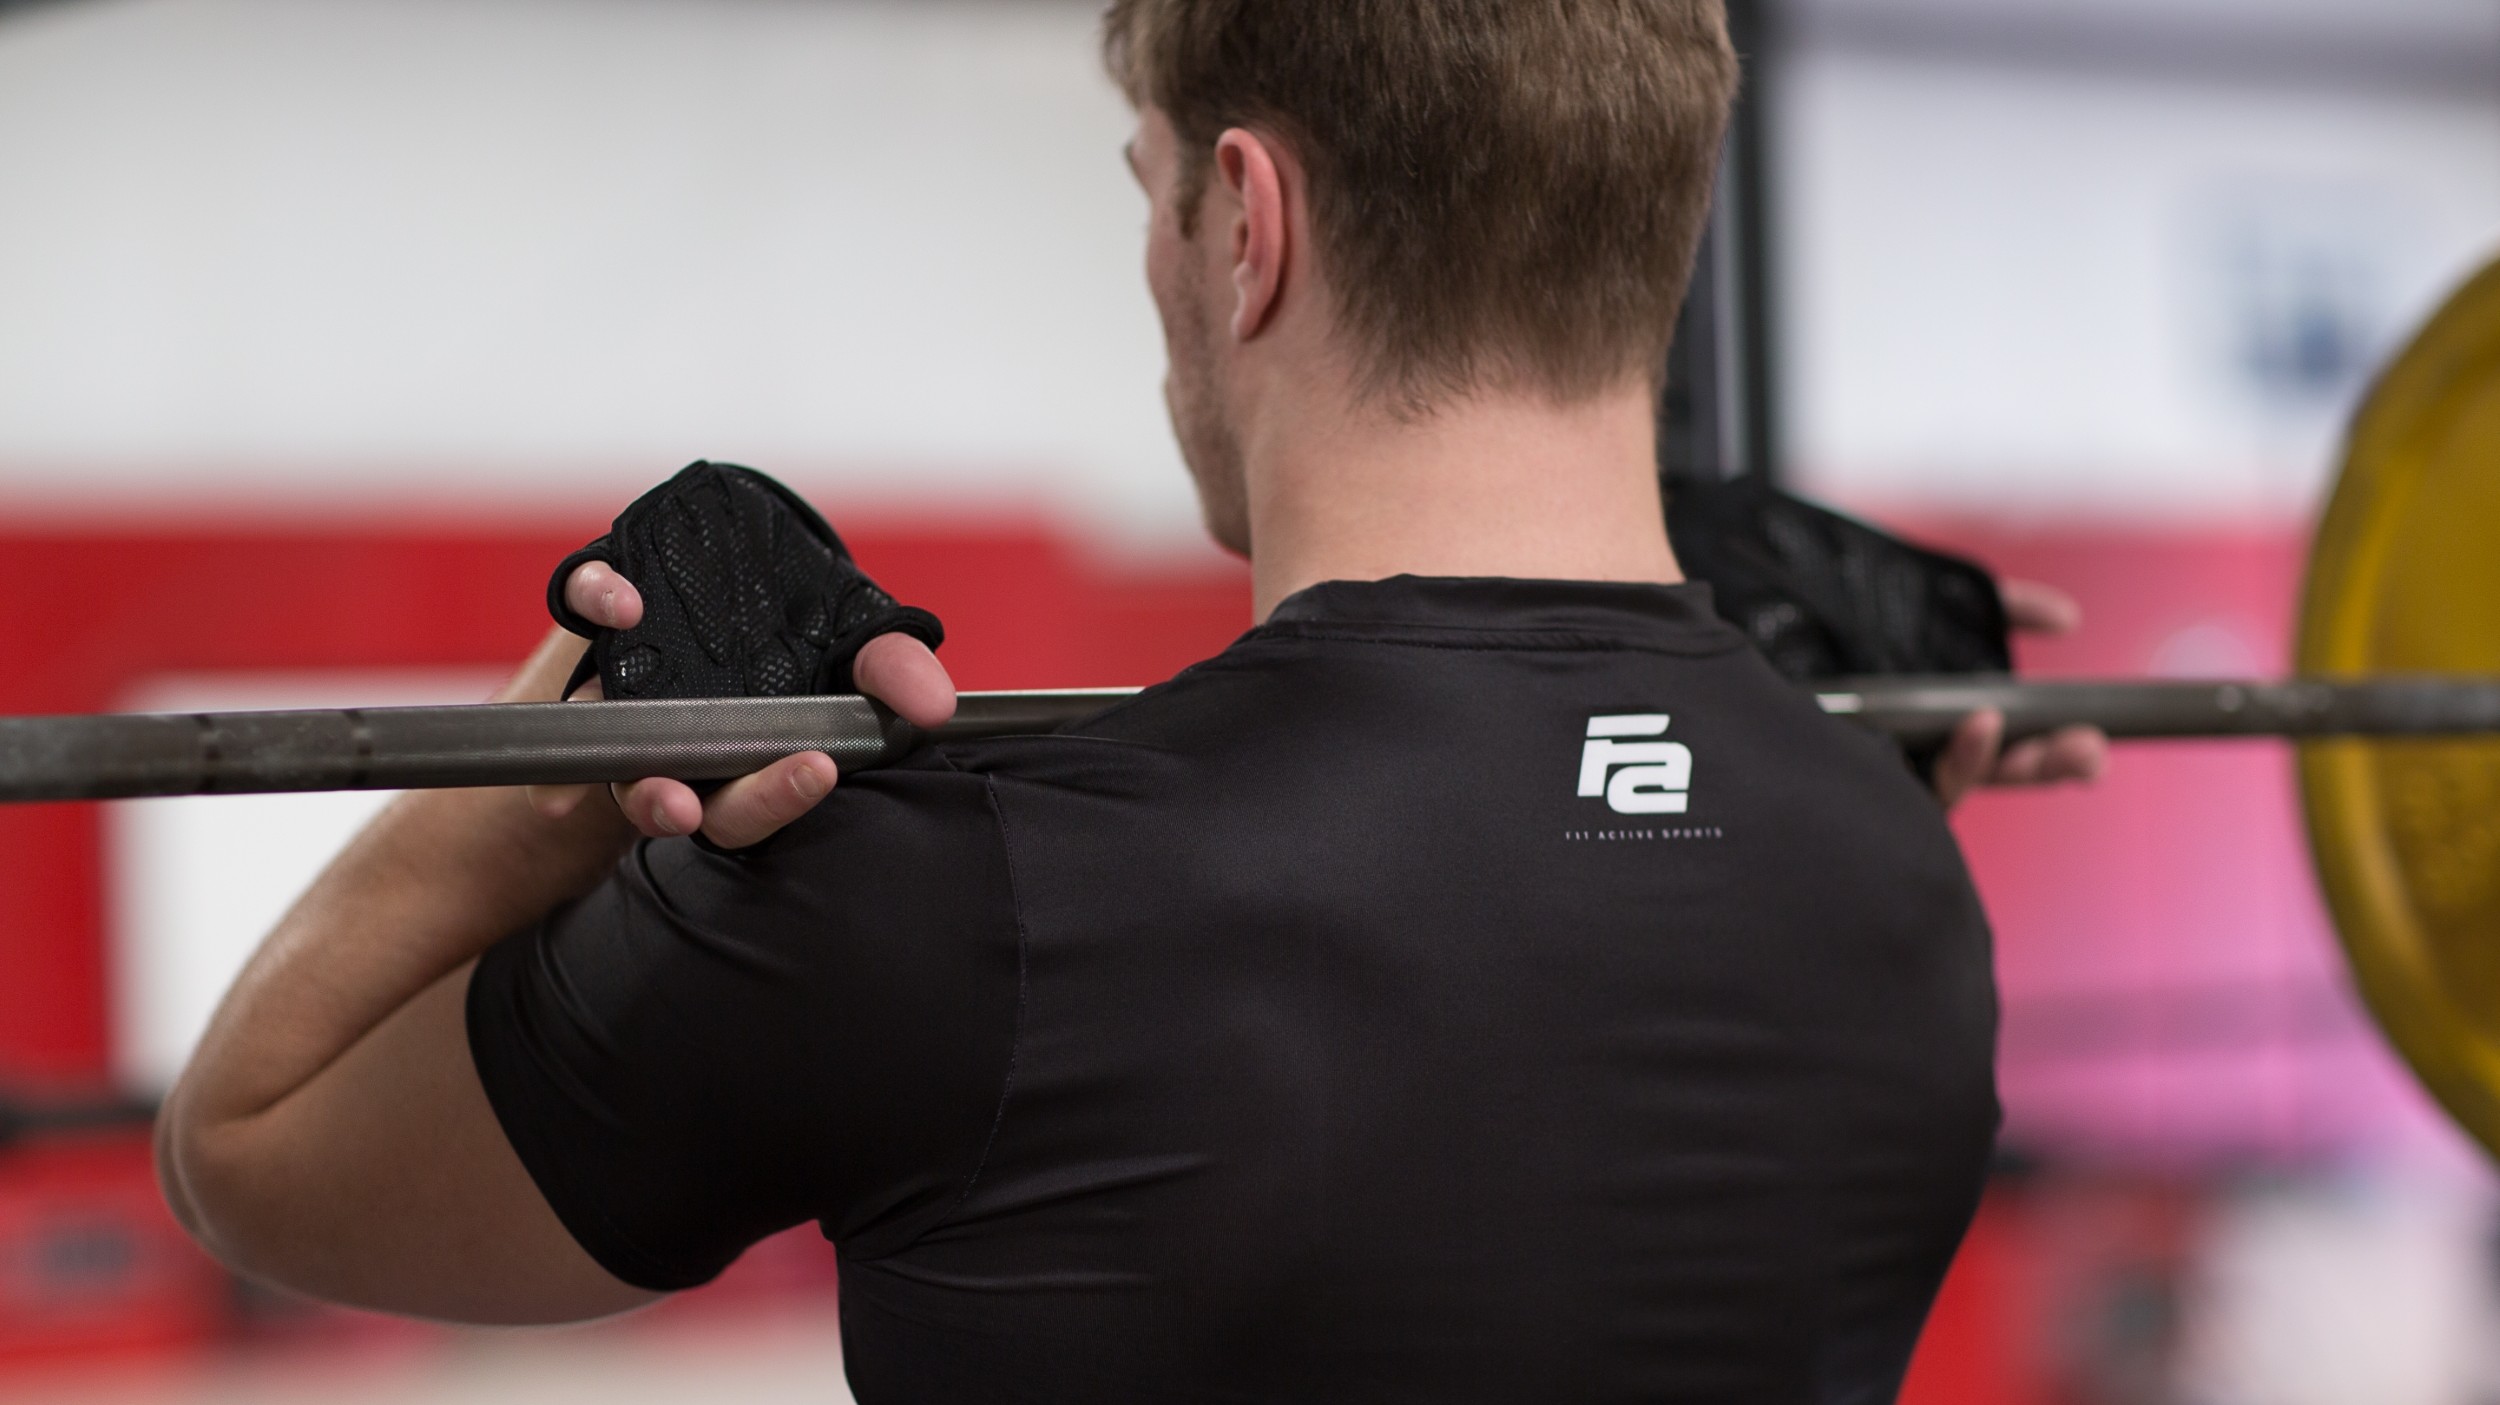 Man wearing black lever belt preparing to squat with barbell